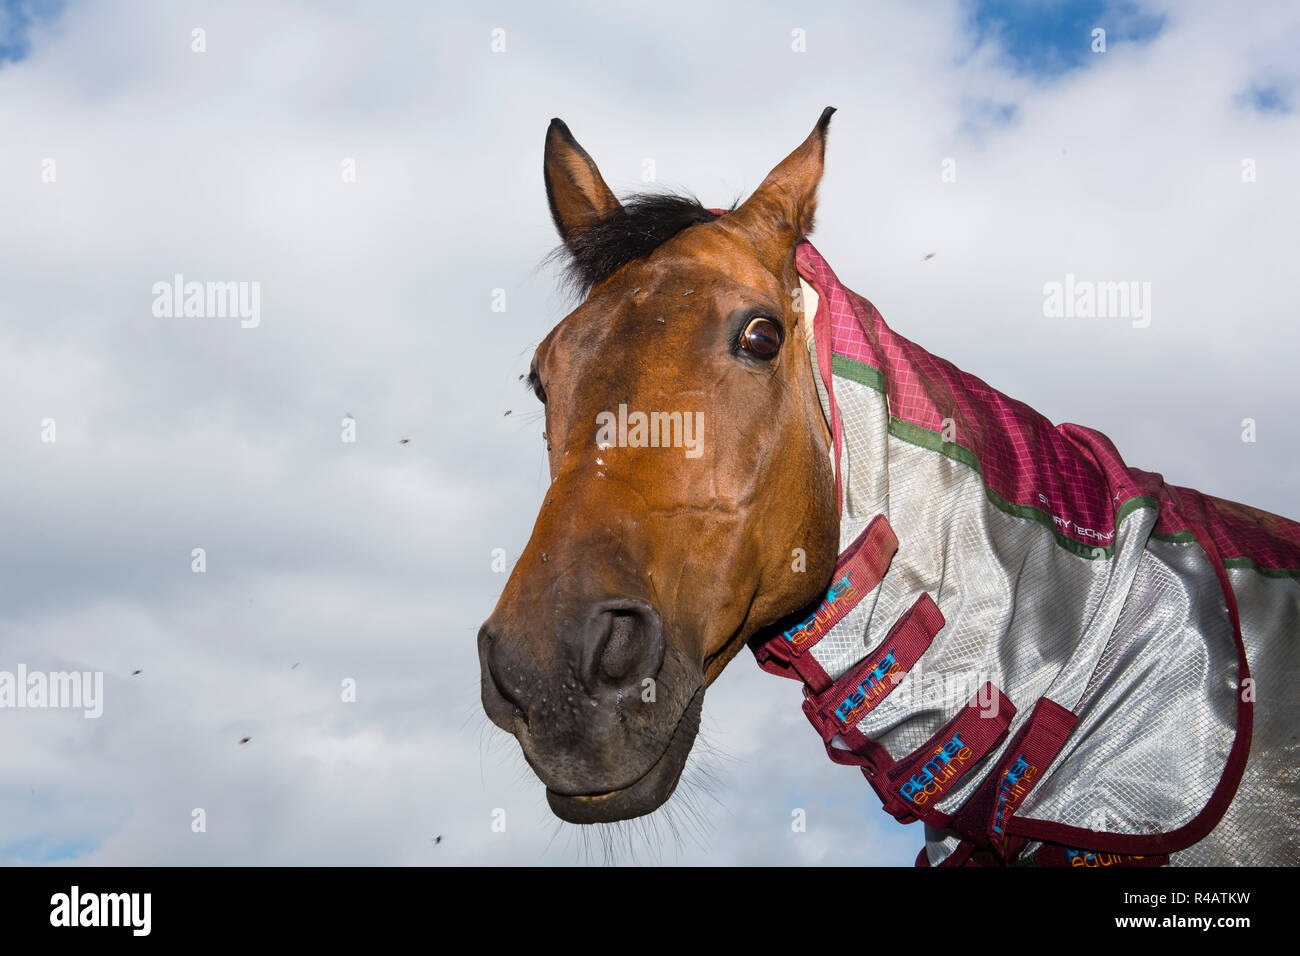 A horse in a field wearing a protective jacket. Stock Photo